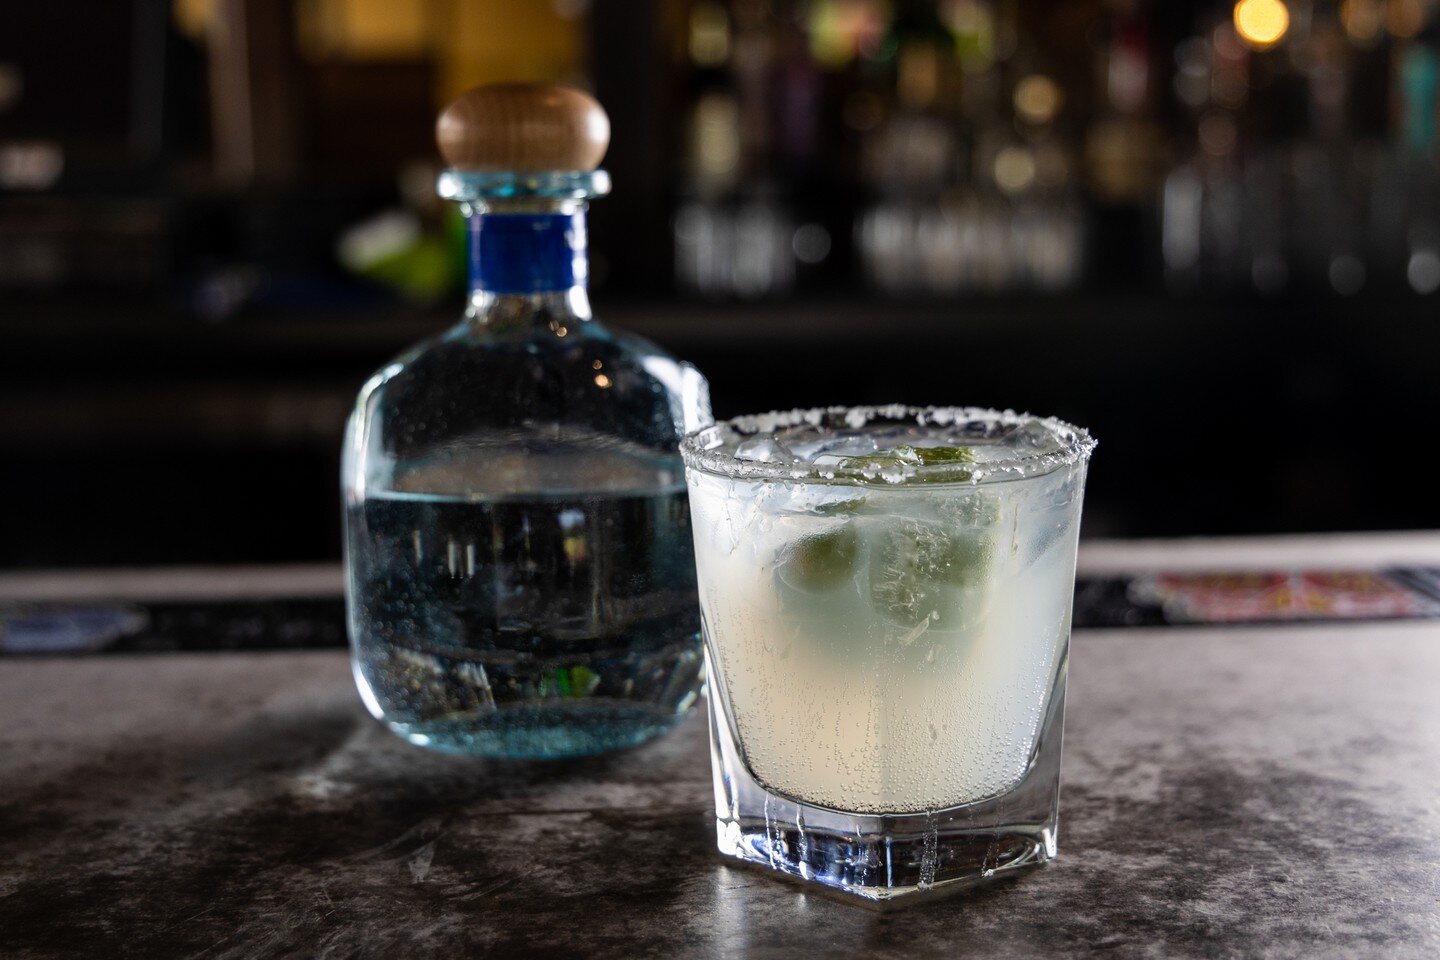 Consider this a sign to join us for Margarita Monday, with $6 margs all day log.